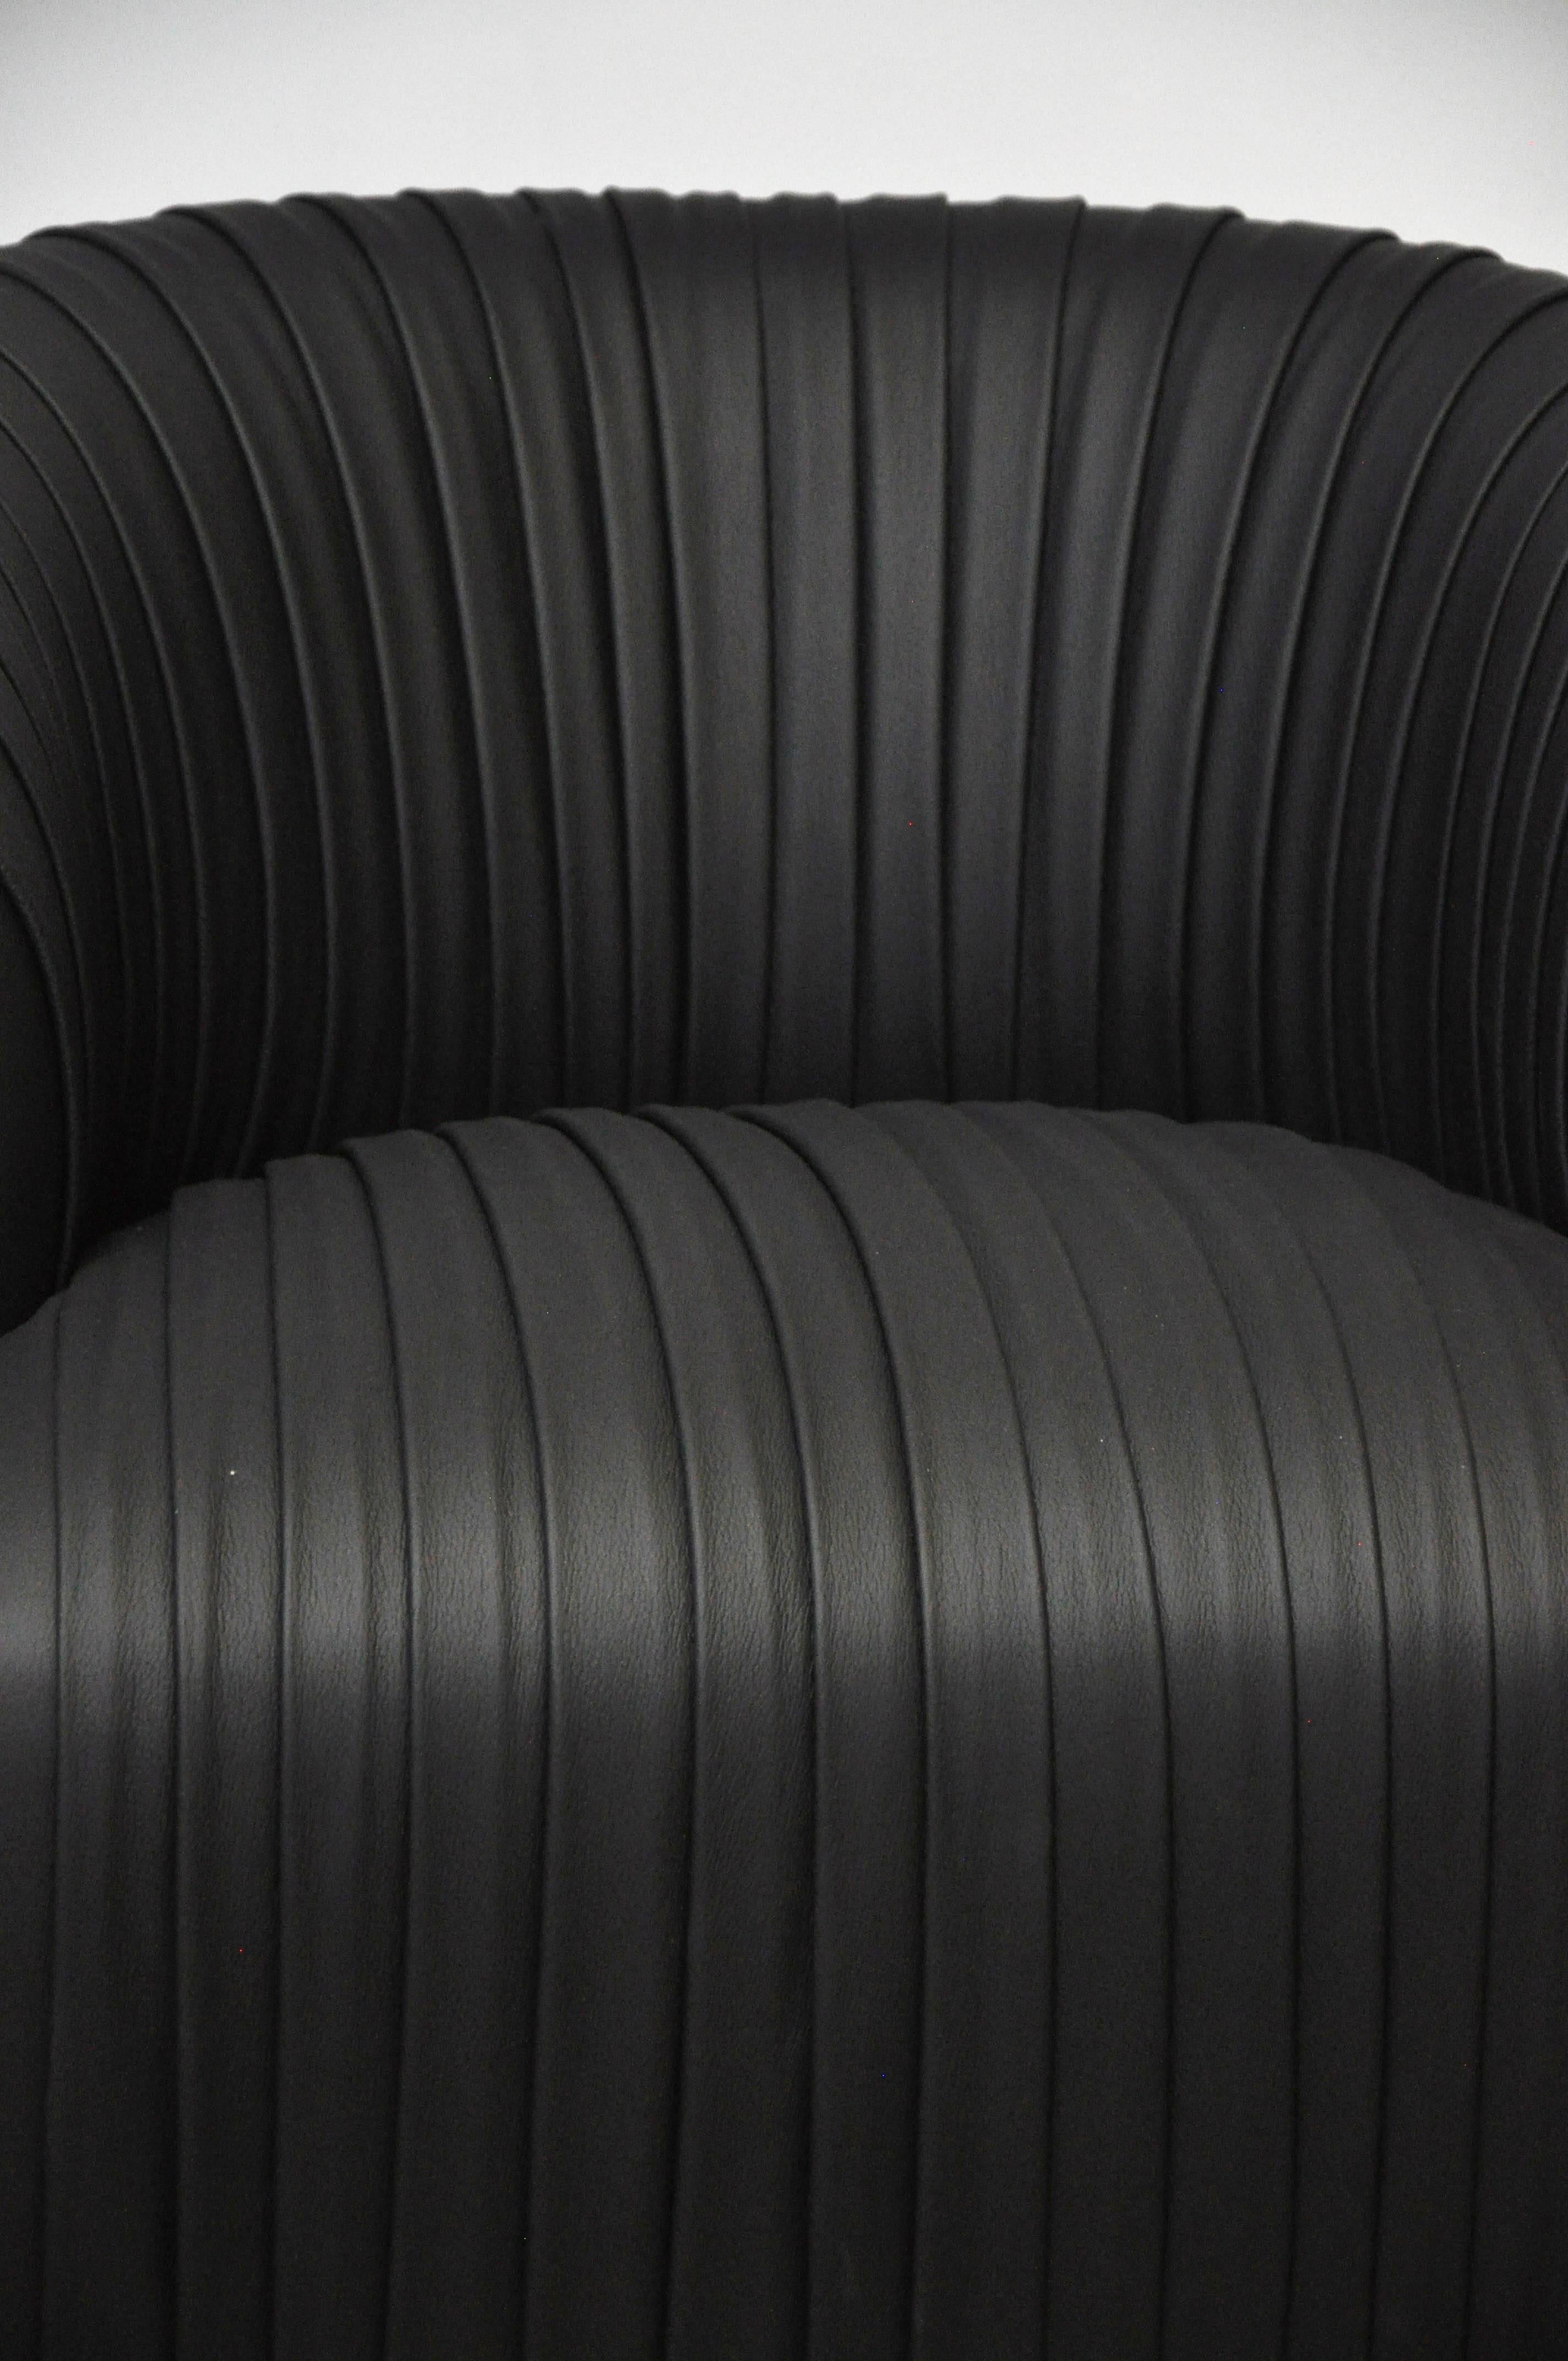 Pair of swivel chairs, circa 1970s. New pleated black leather upholstery.